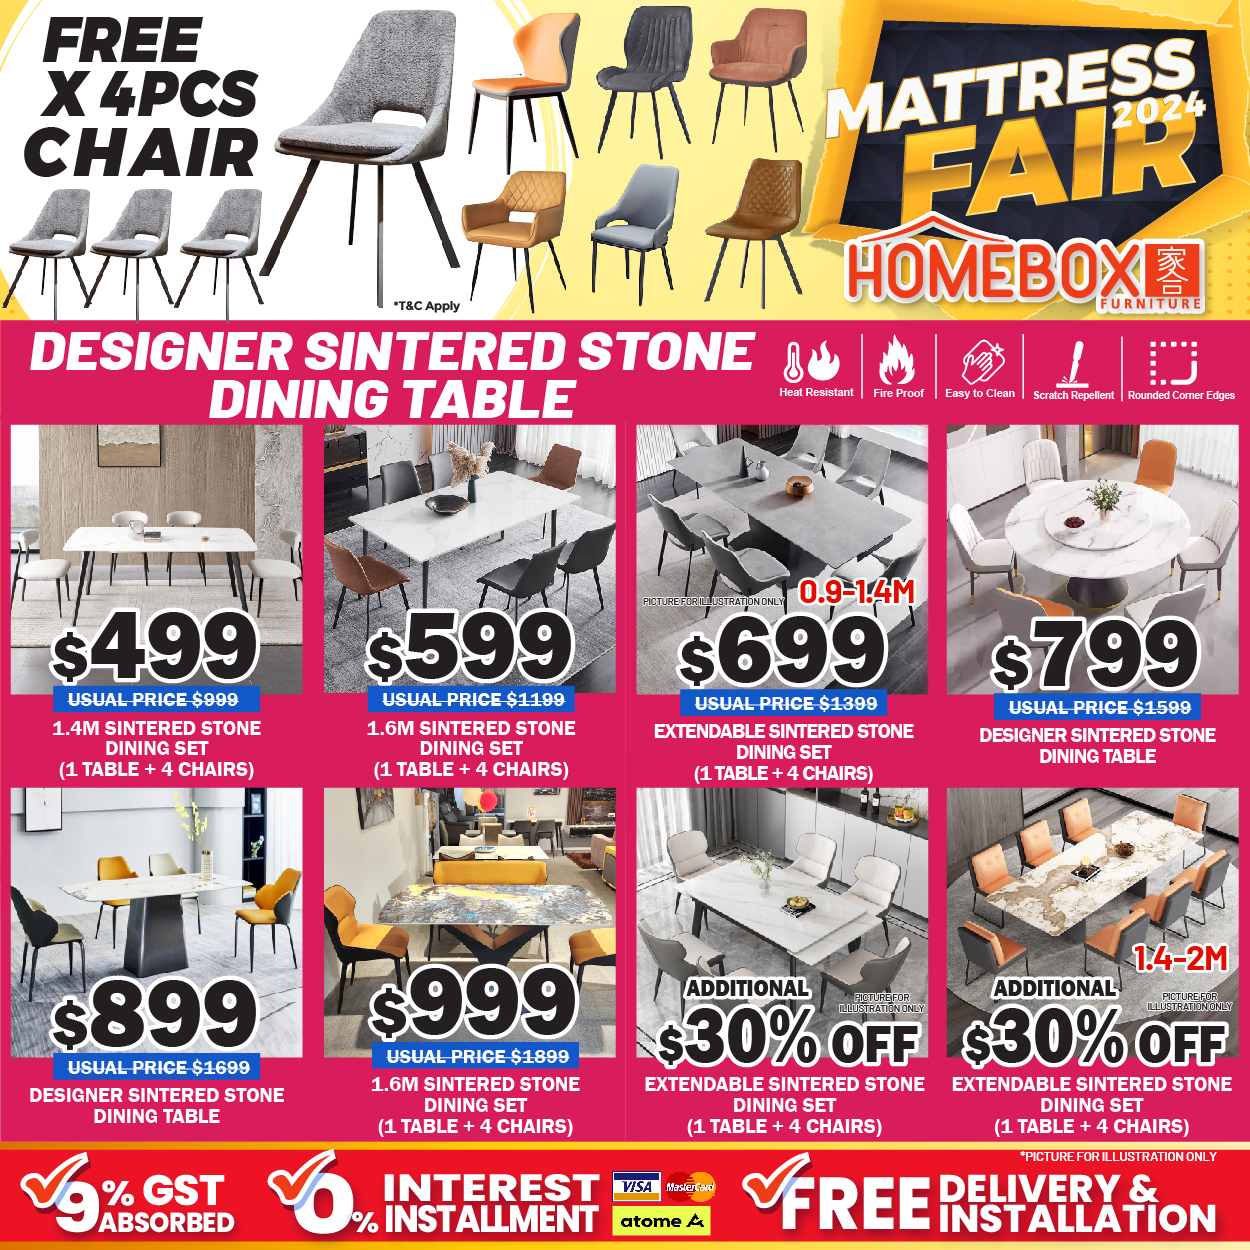 Lobang: Homebox's Biggest Mattress Fair in Aljunied Has Everything At Up To 80% Off From Now Till 5 May 24. Get A Free Mattres Upgrade During The Sale! - 21